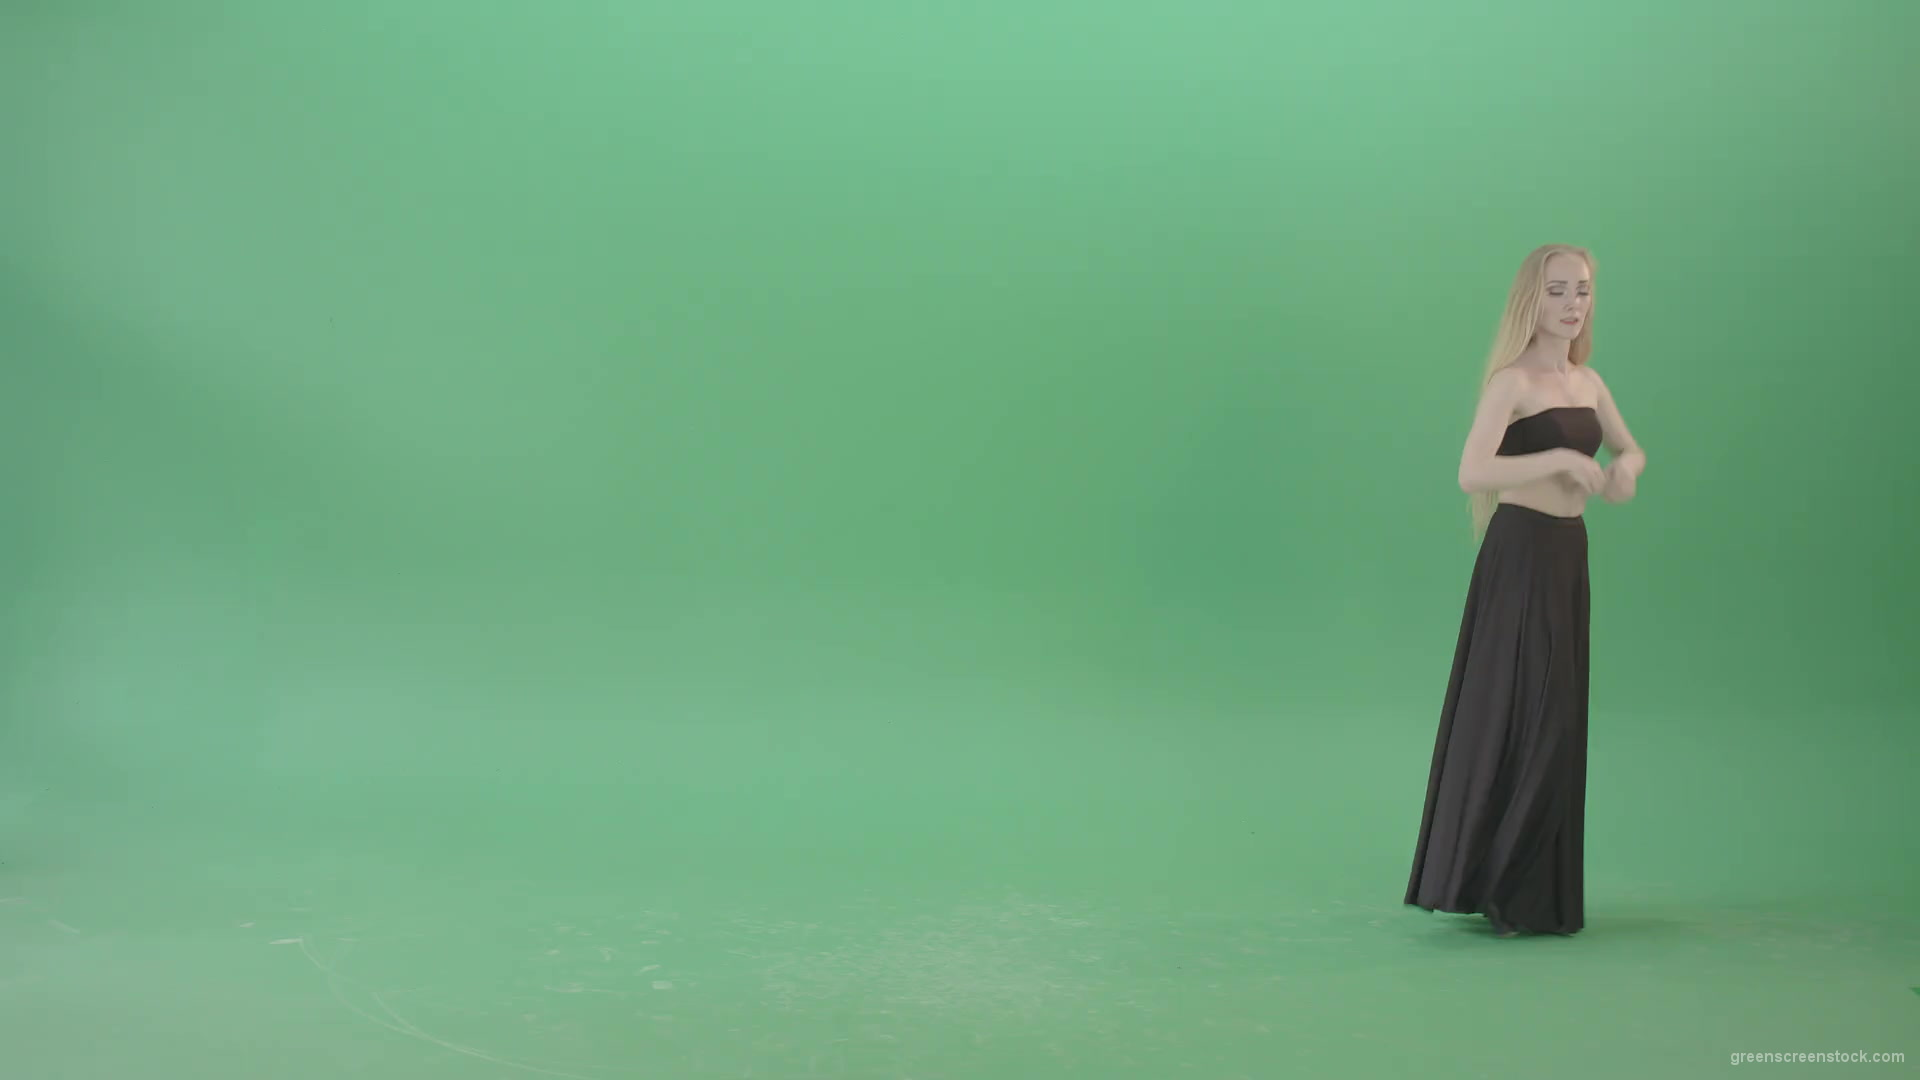 Hot-passion-ballet-girl-in-black-dress-dancing-on-green-screen-4K-Video-Footage-1920_001 Green Screen Stock